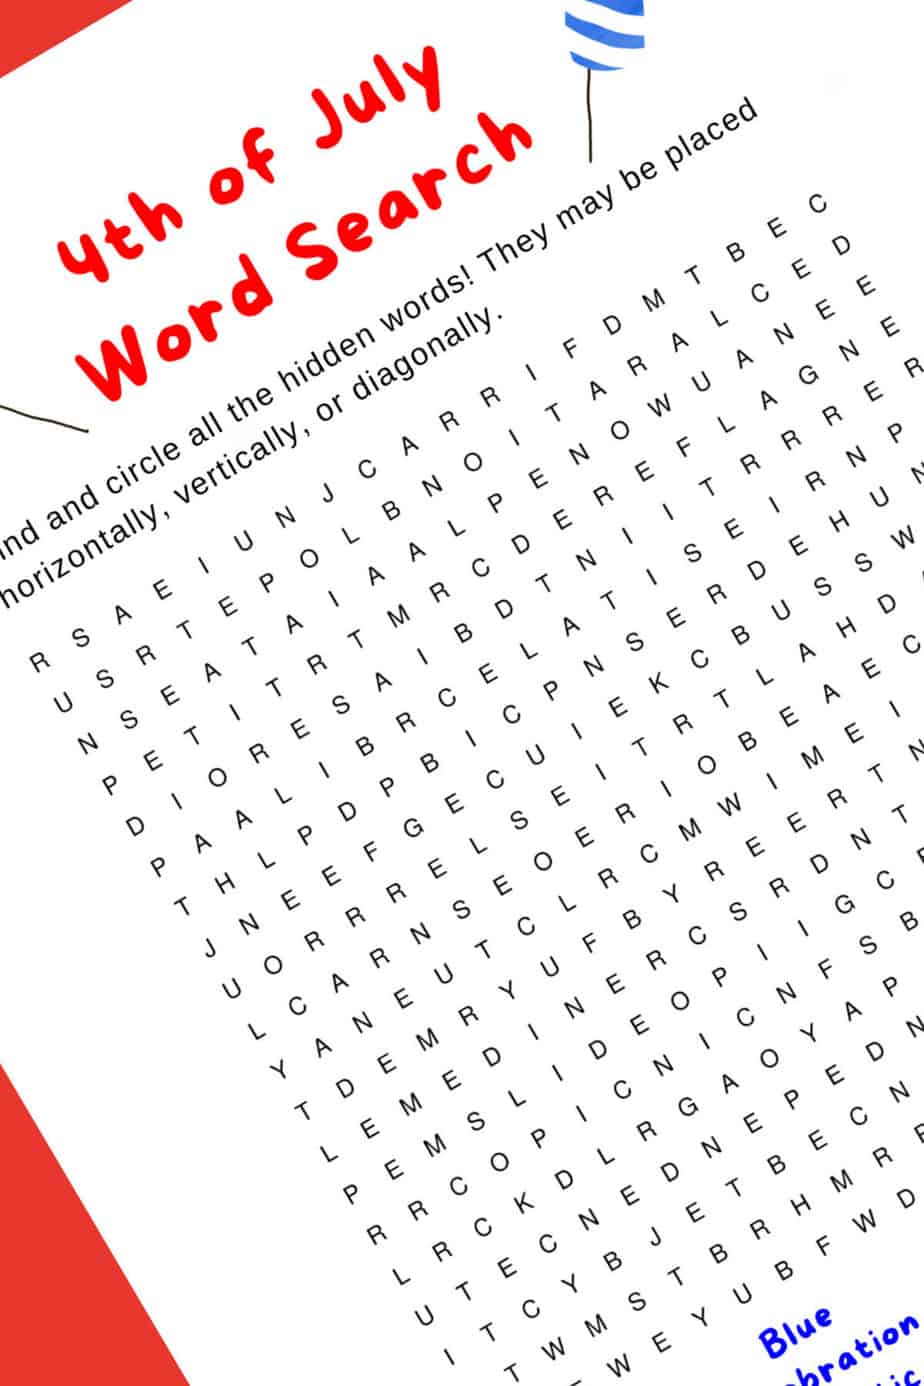 4th of July Word Search